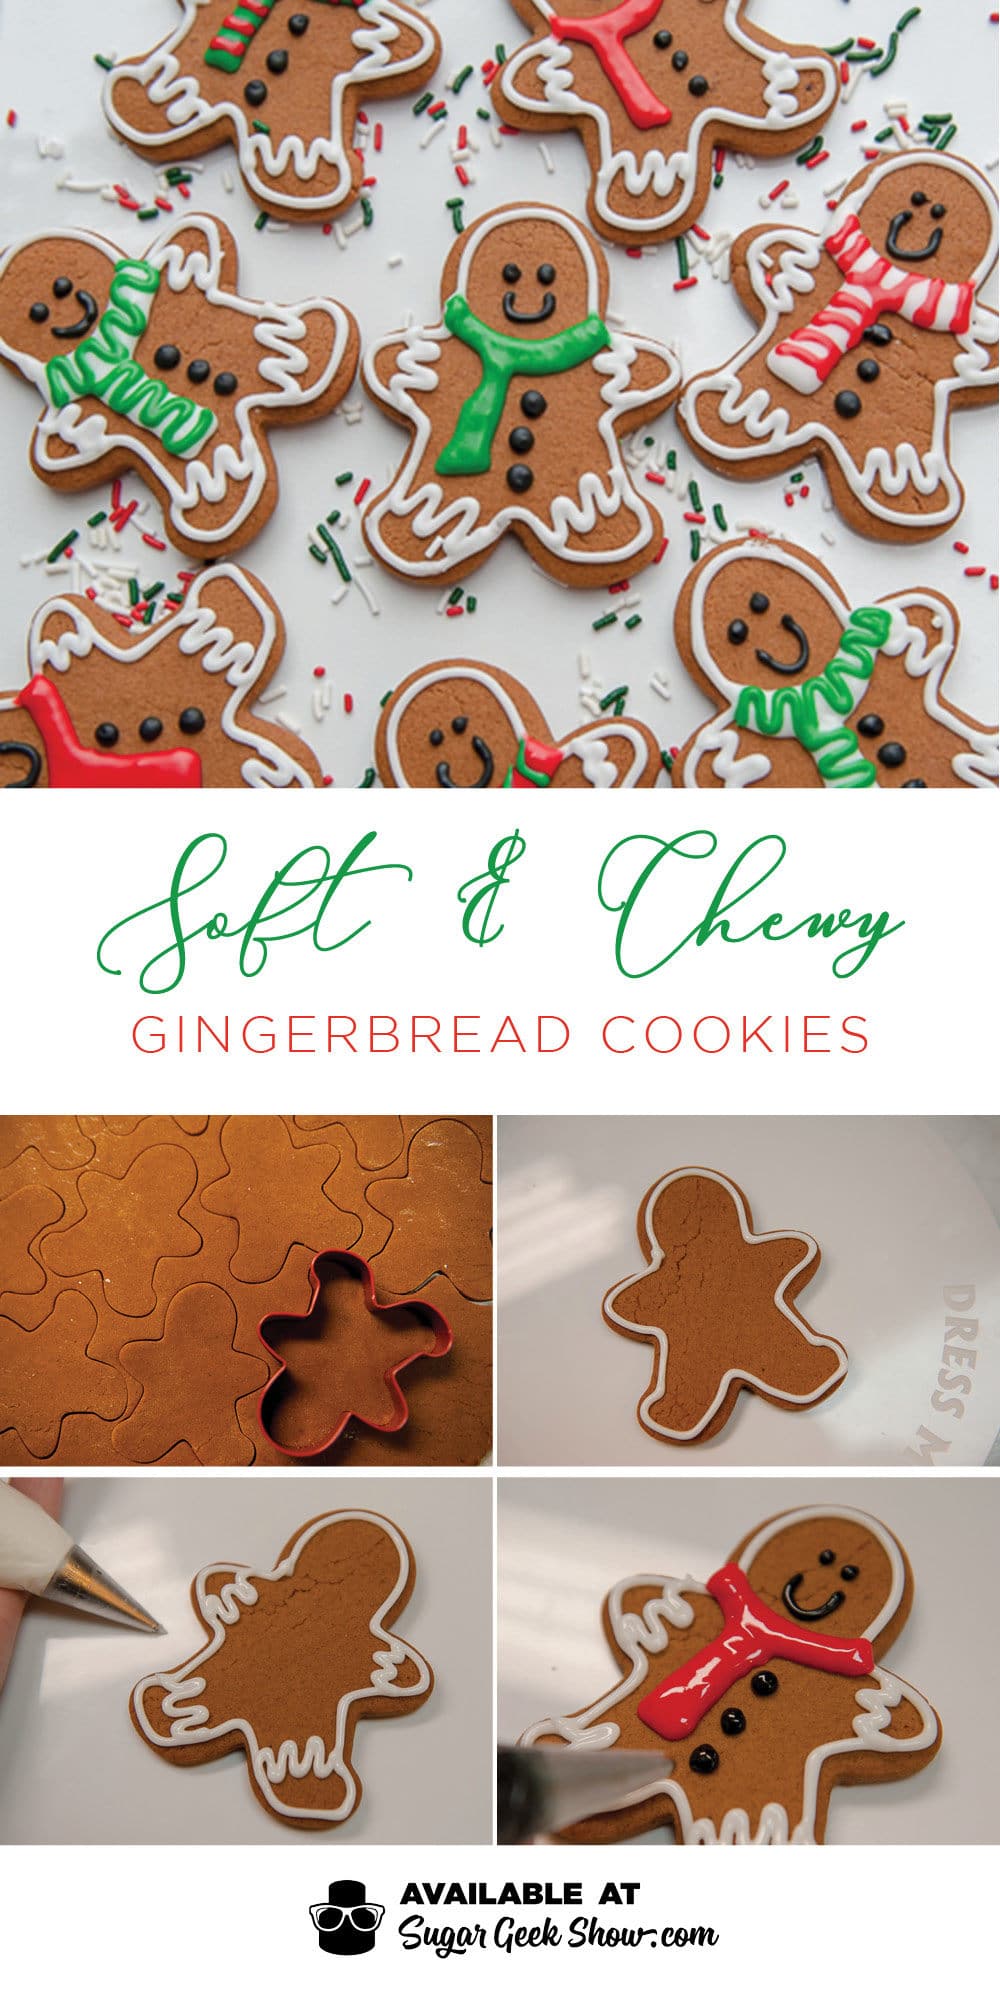 Soft and chewy gingerbread cookies get their amazing texture from butter, brown sugar and molasses! Super simple no-spread recipe and easy piping tips for the cutest gingerbread men cookies ever